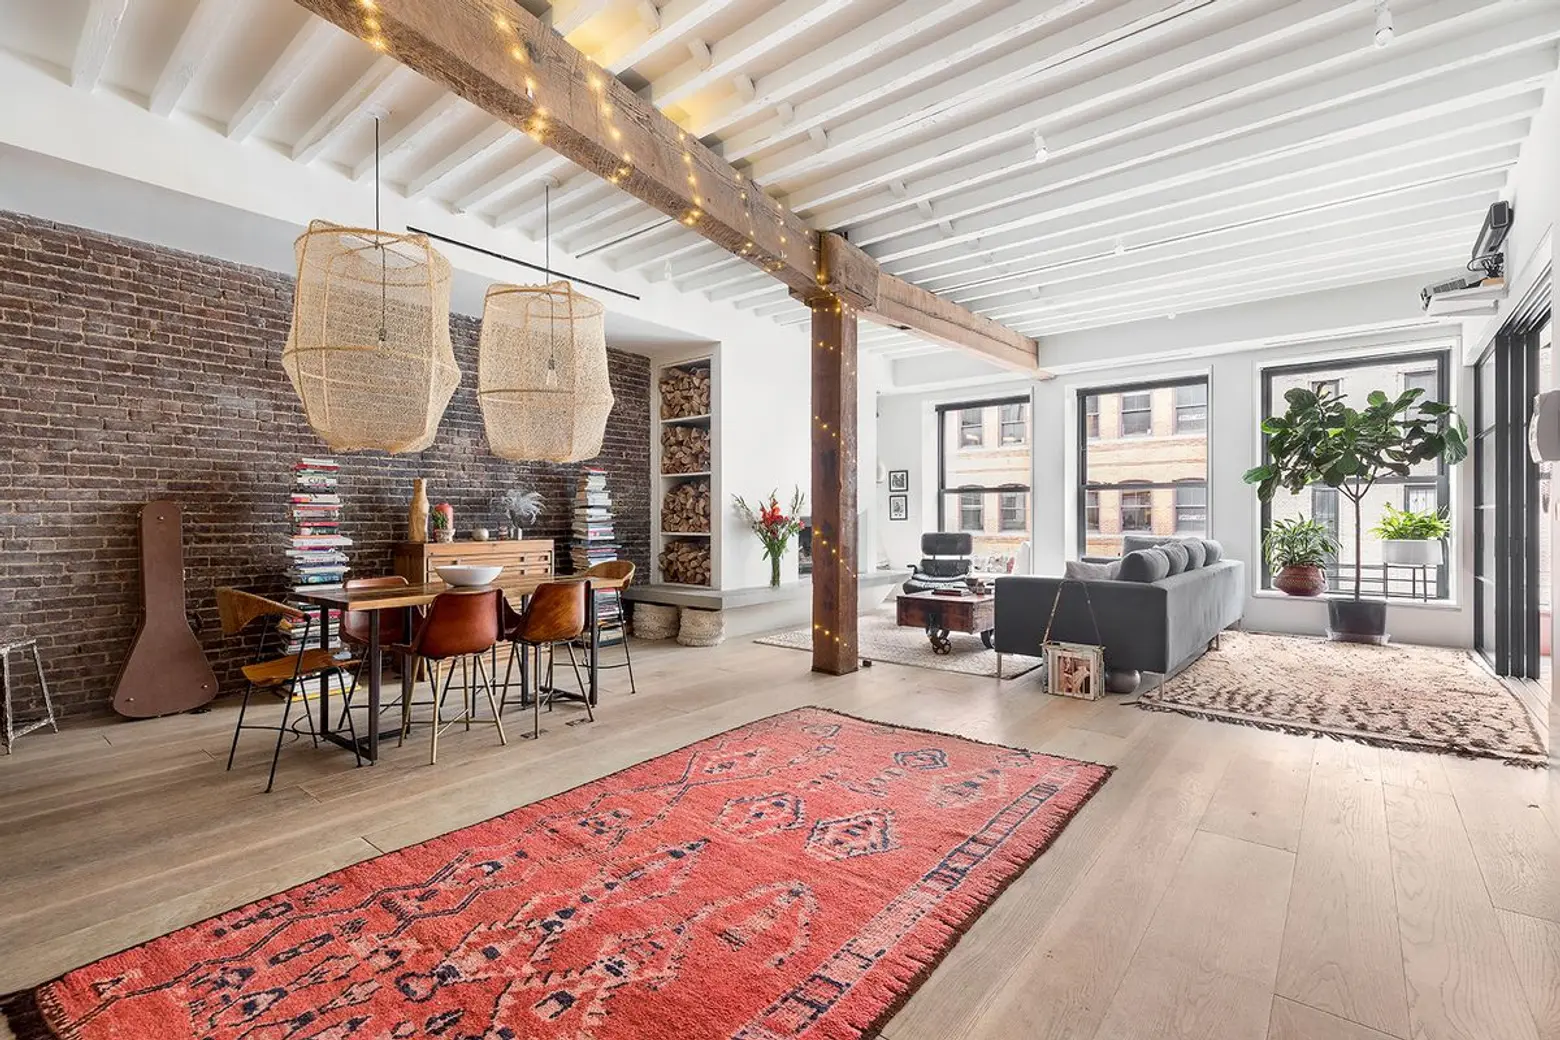 This $6.2M Tribeca loft perfects a clean, modern look with an indoor vertical garden